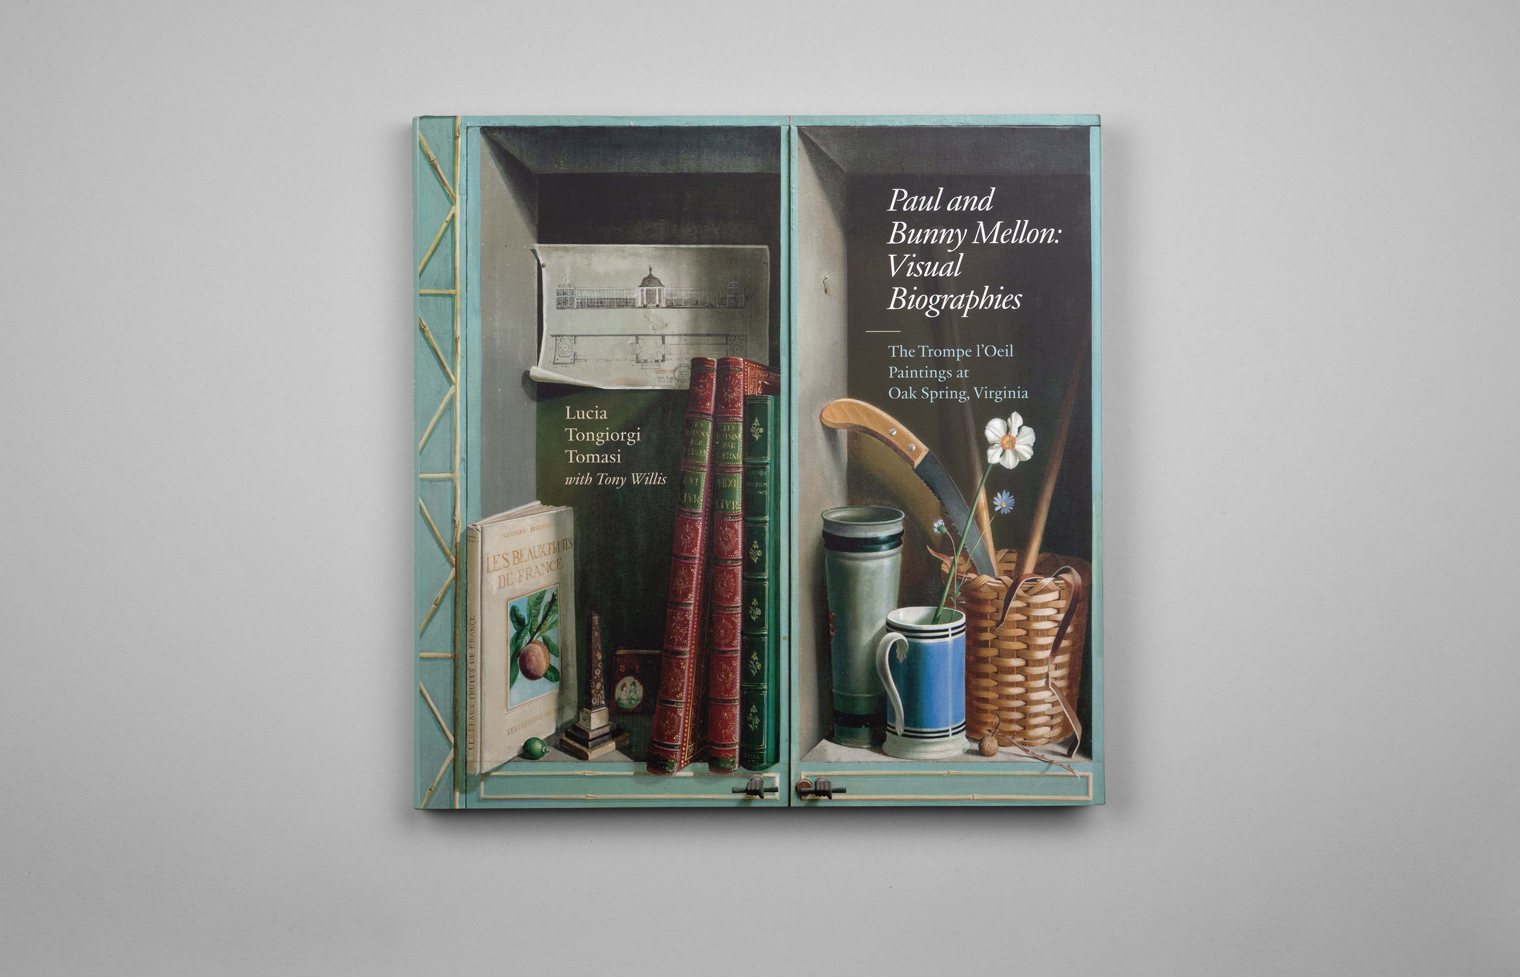 Book cover with a detail of a trompe l'oeil painting showing shelves with various items including books and a cup.